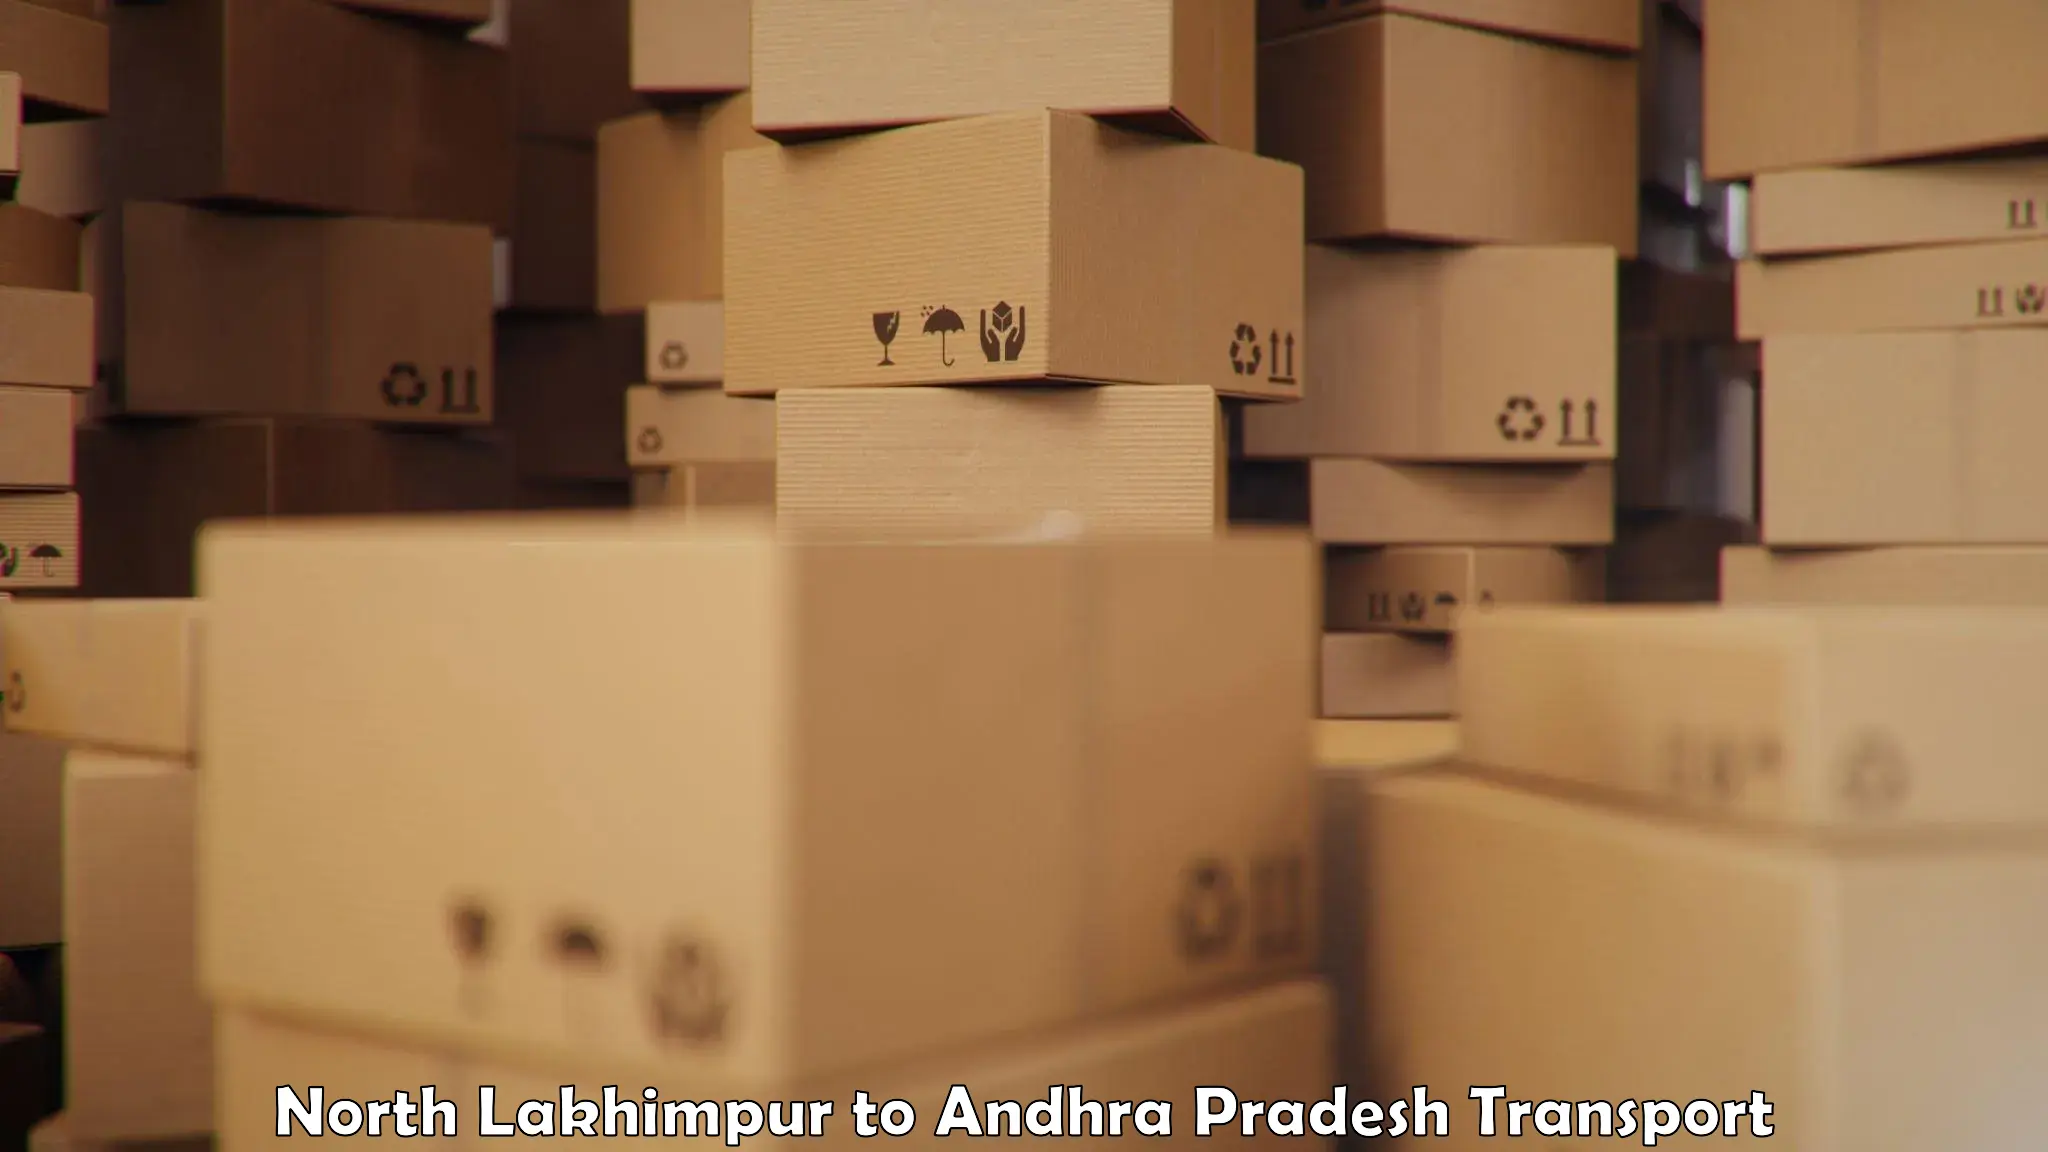 Lorry transport service in North Lakhimpur to Anakapalli